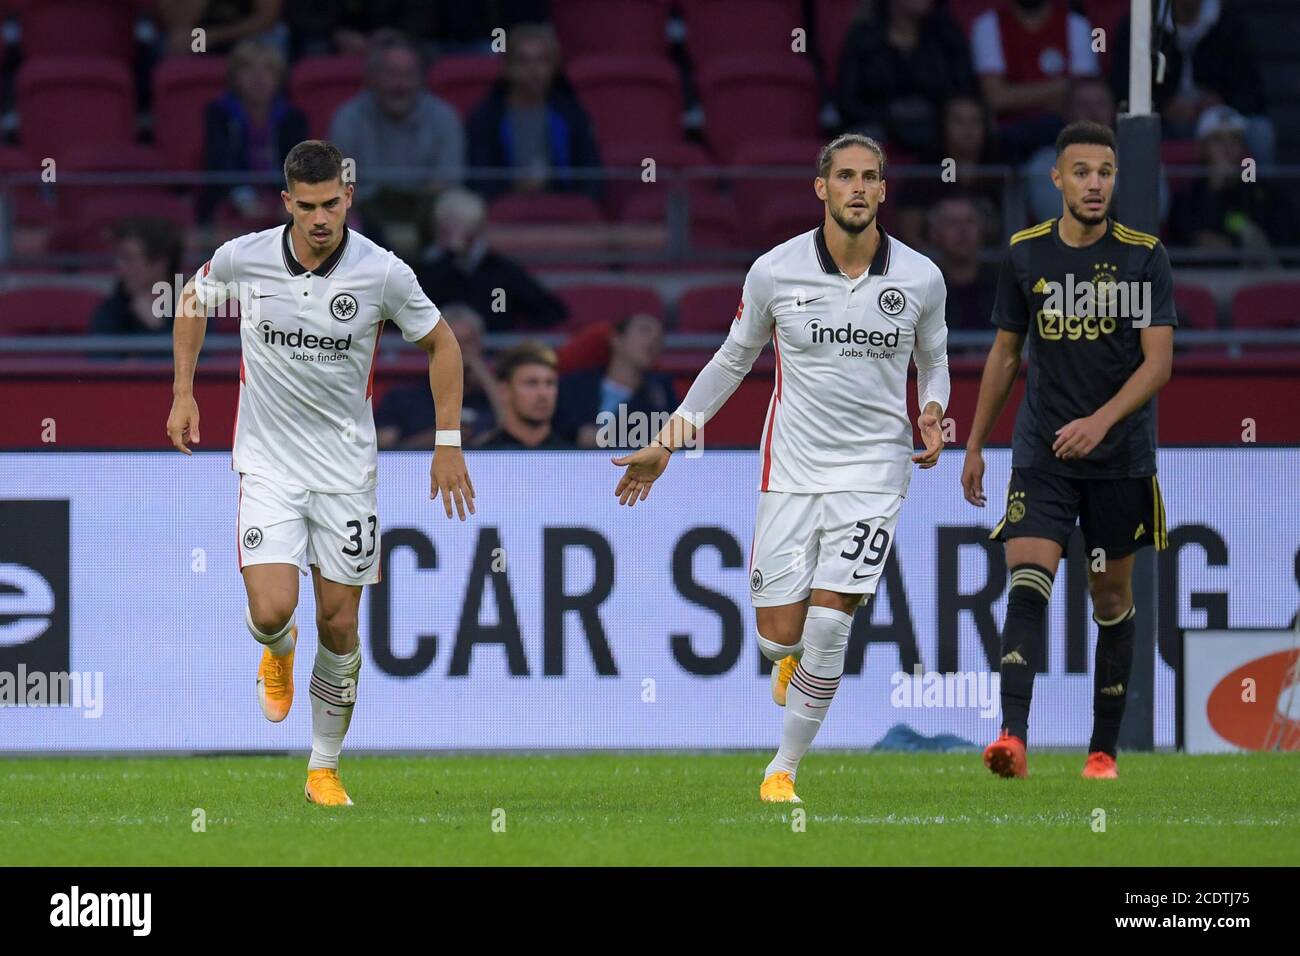 AMSTERDAM, NETHERLANDS - AUGUST 29: Andre Silva of Eintracht Frankfurt celebrating his goal with Goncalo Paciencia of Eintracht Frankfurt, Noussair Mazraoui of Ajax disappointed during the pre season match between Ajax and Eintracht Frankfurt on August 29, 2020 in Amsterdam, The Netherlands.   *** Local Caption *** Andre Silva, Goncalo Paciencia, Noussair Mazraoui Stock Photo